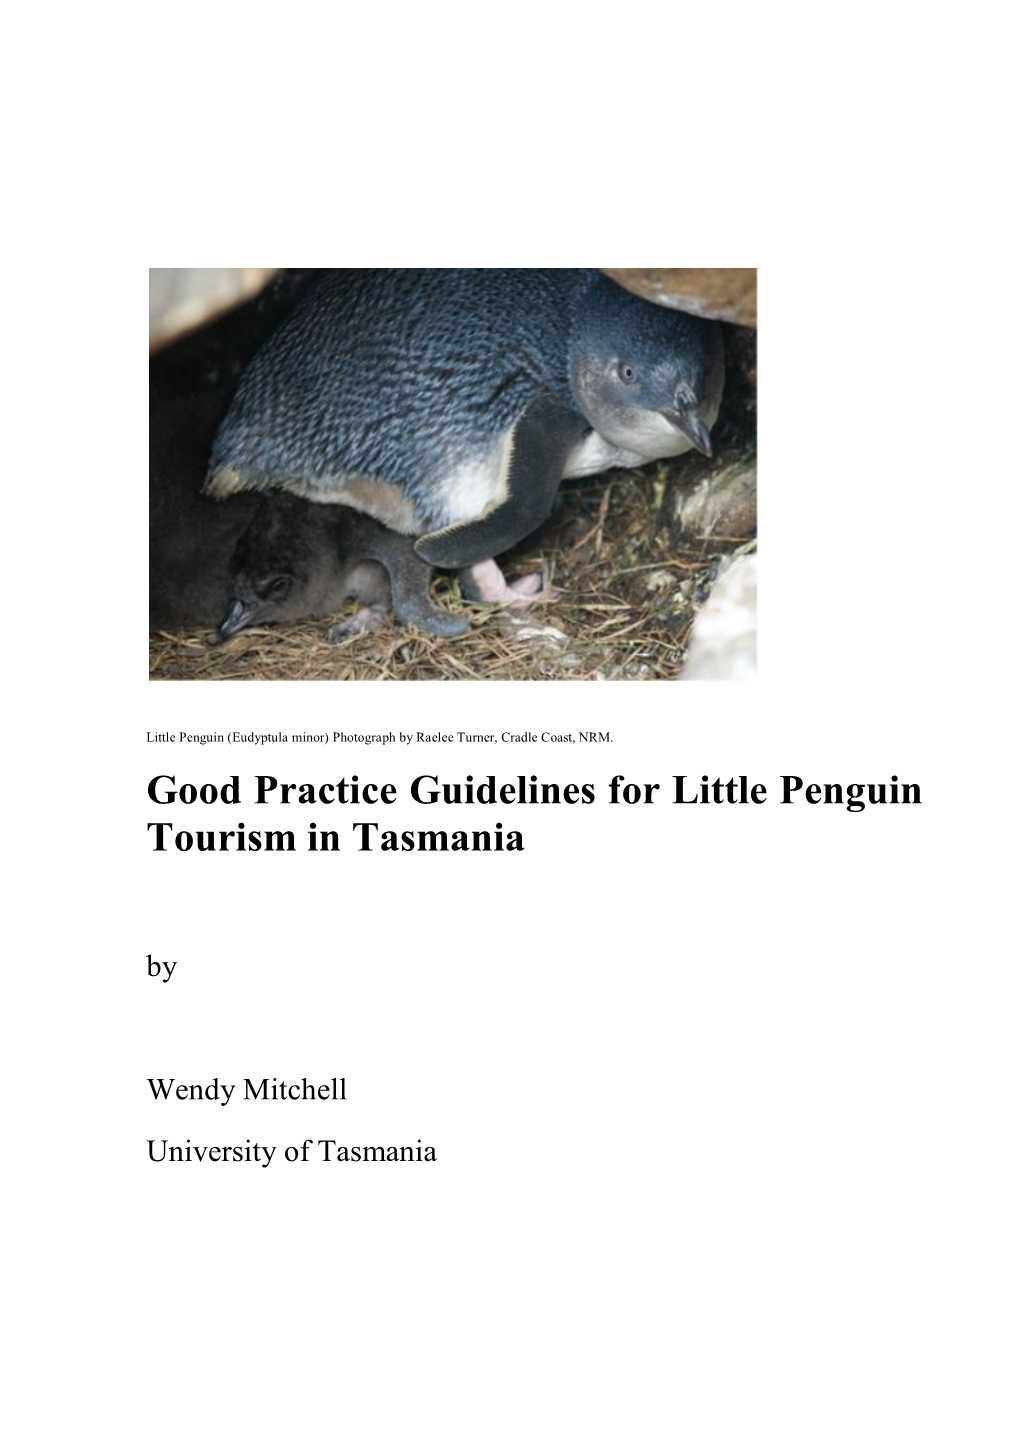 Good Practice Guidelines for Little Penguins Tourism in Tasmania